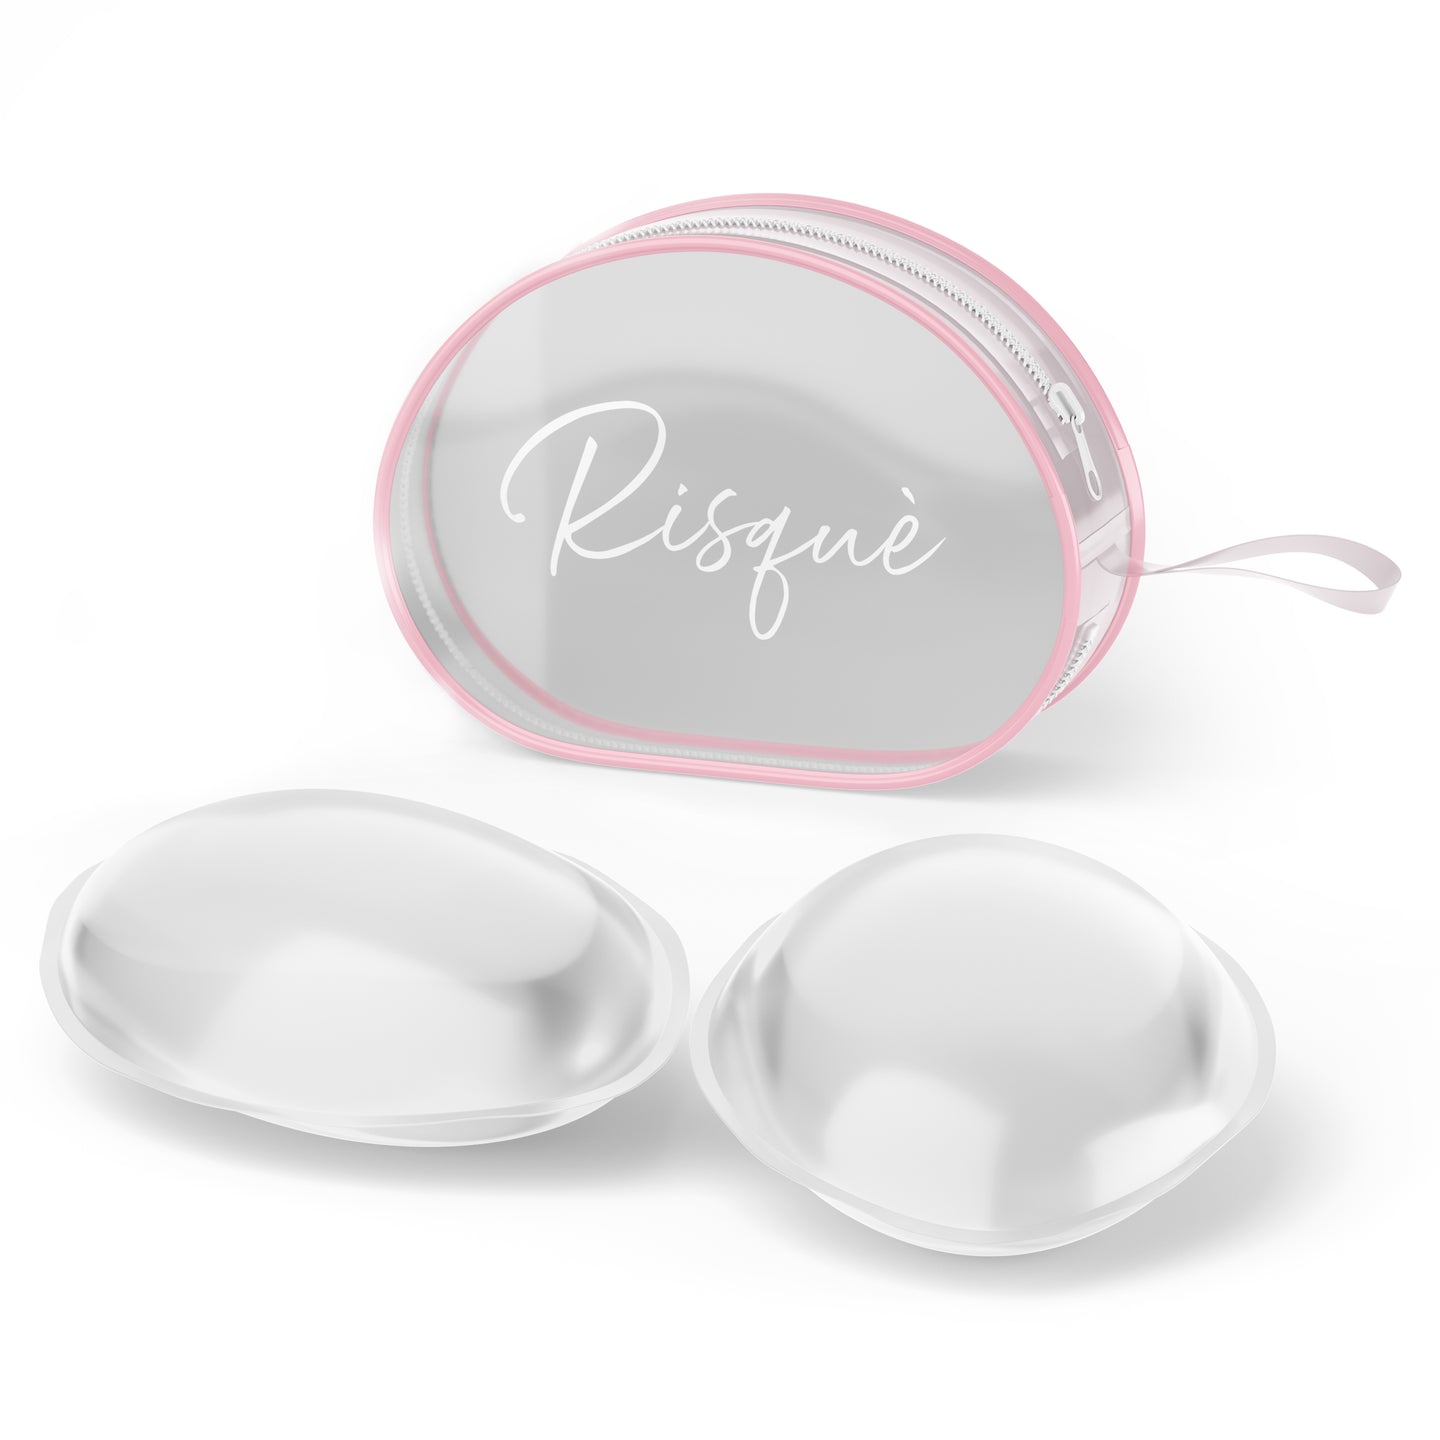 Silicone Bra Inserts Self-adhesive Bra Pads Inserts Removable